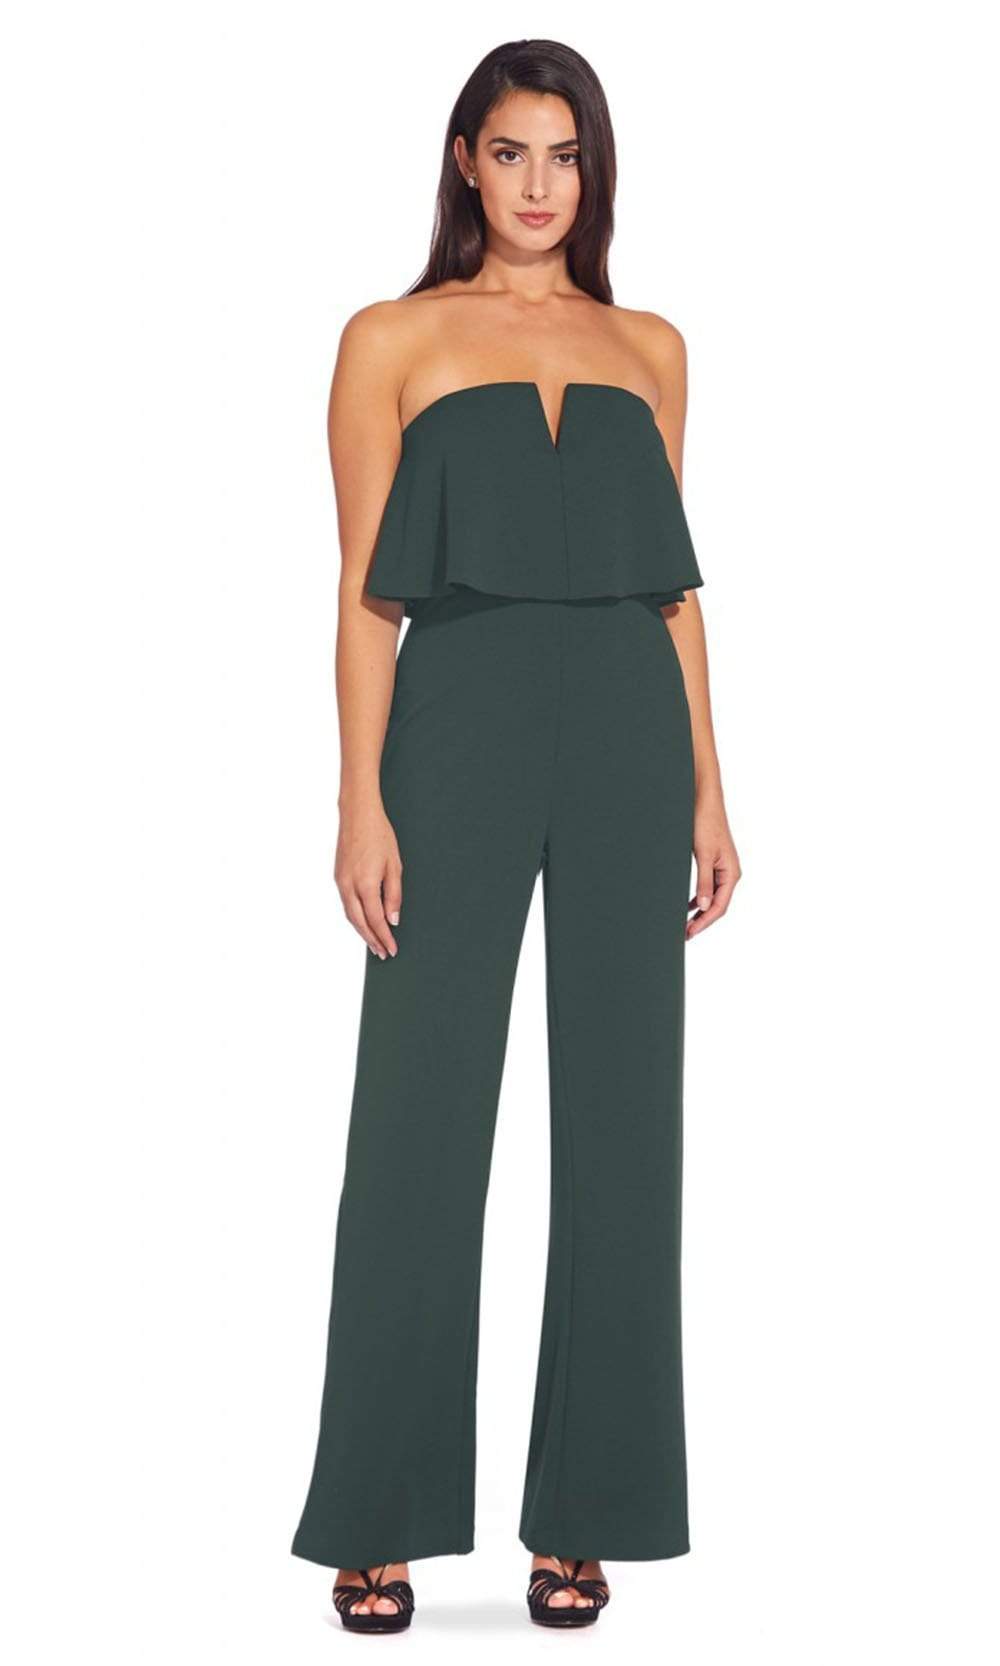 Adrianna Papell - AP1E206916 Strapless Flounce Bodice Crepe Jumpsuit Special Occasion Dress 2 / Dusty Emerald